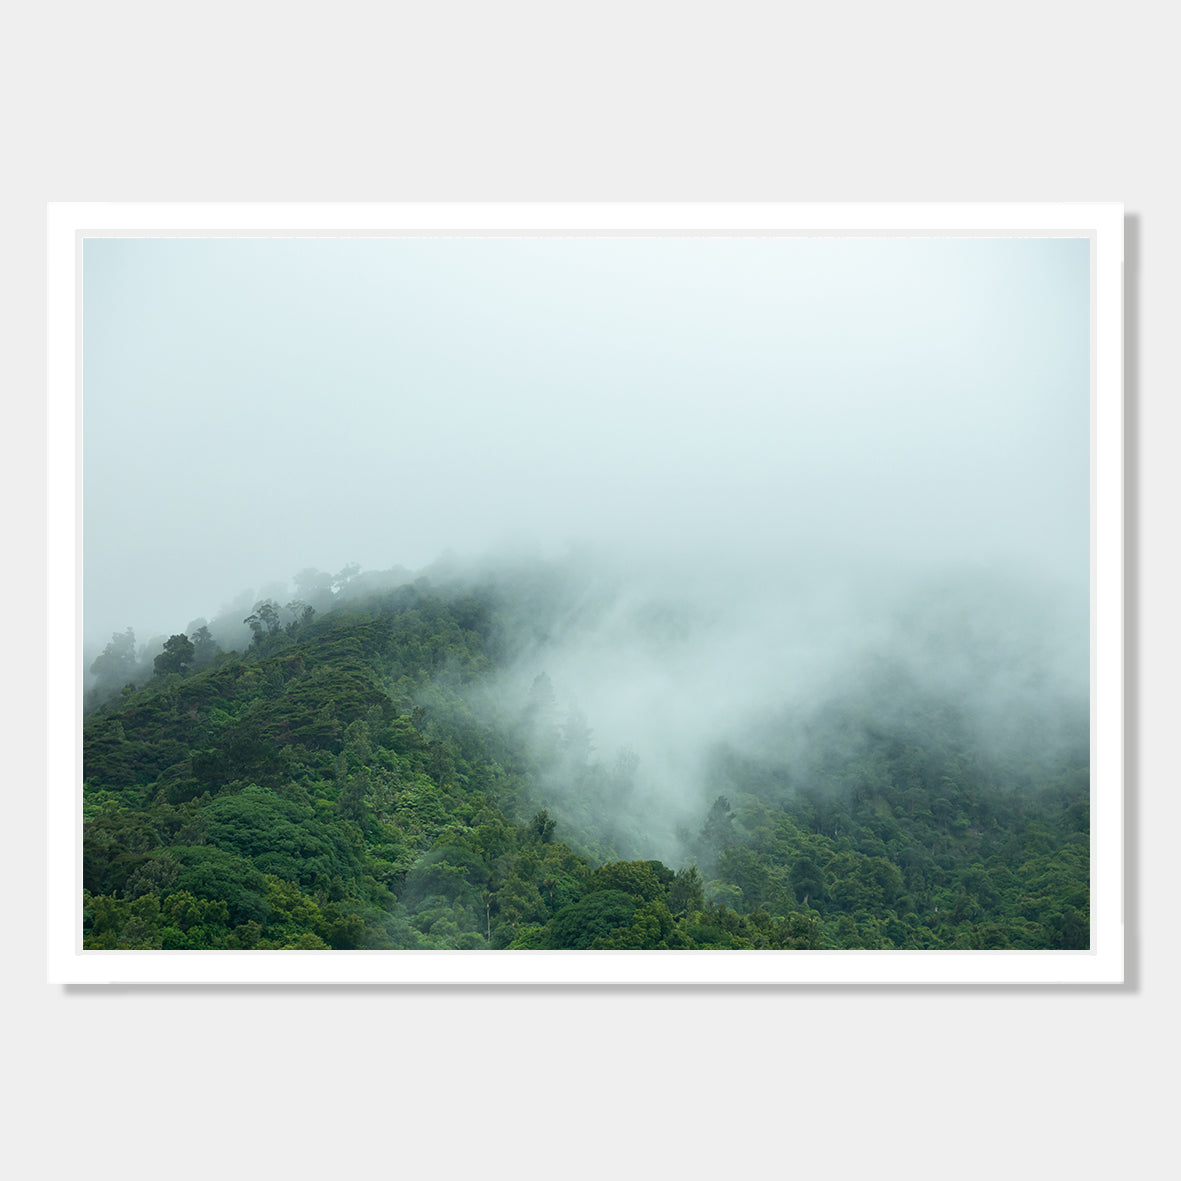 Photographic Art Print of hill side shrouded in mist, Te Aroha, New Zealand by Chris Starkey. Printed in New Zealand by endemicworld and framed in white.